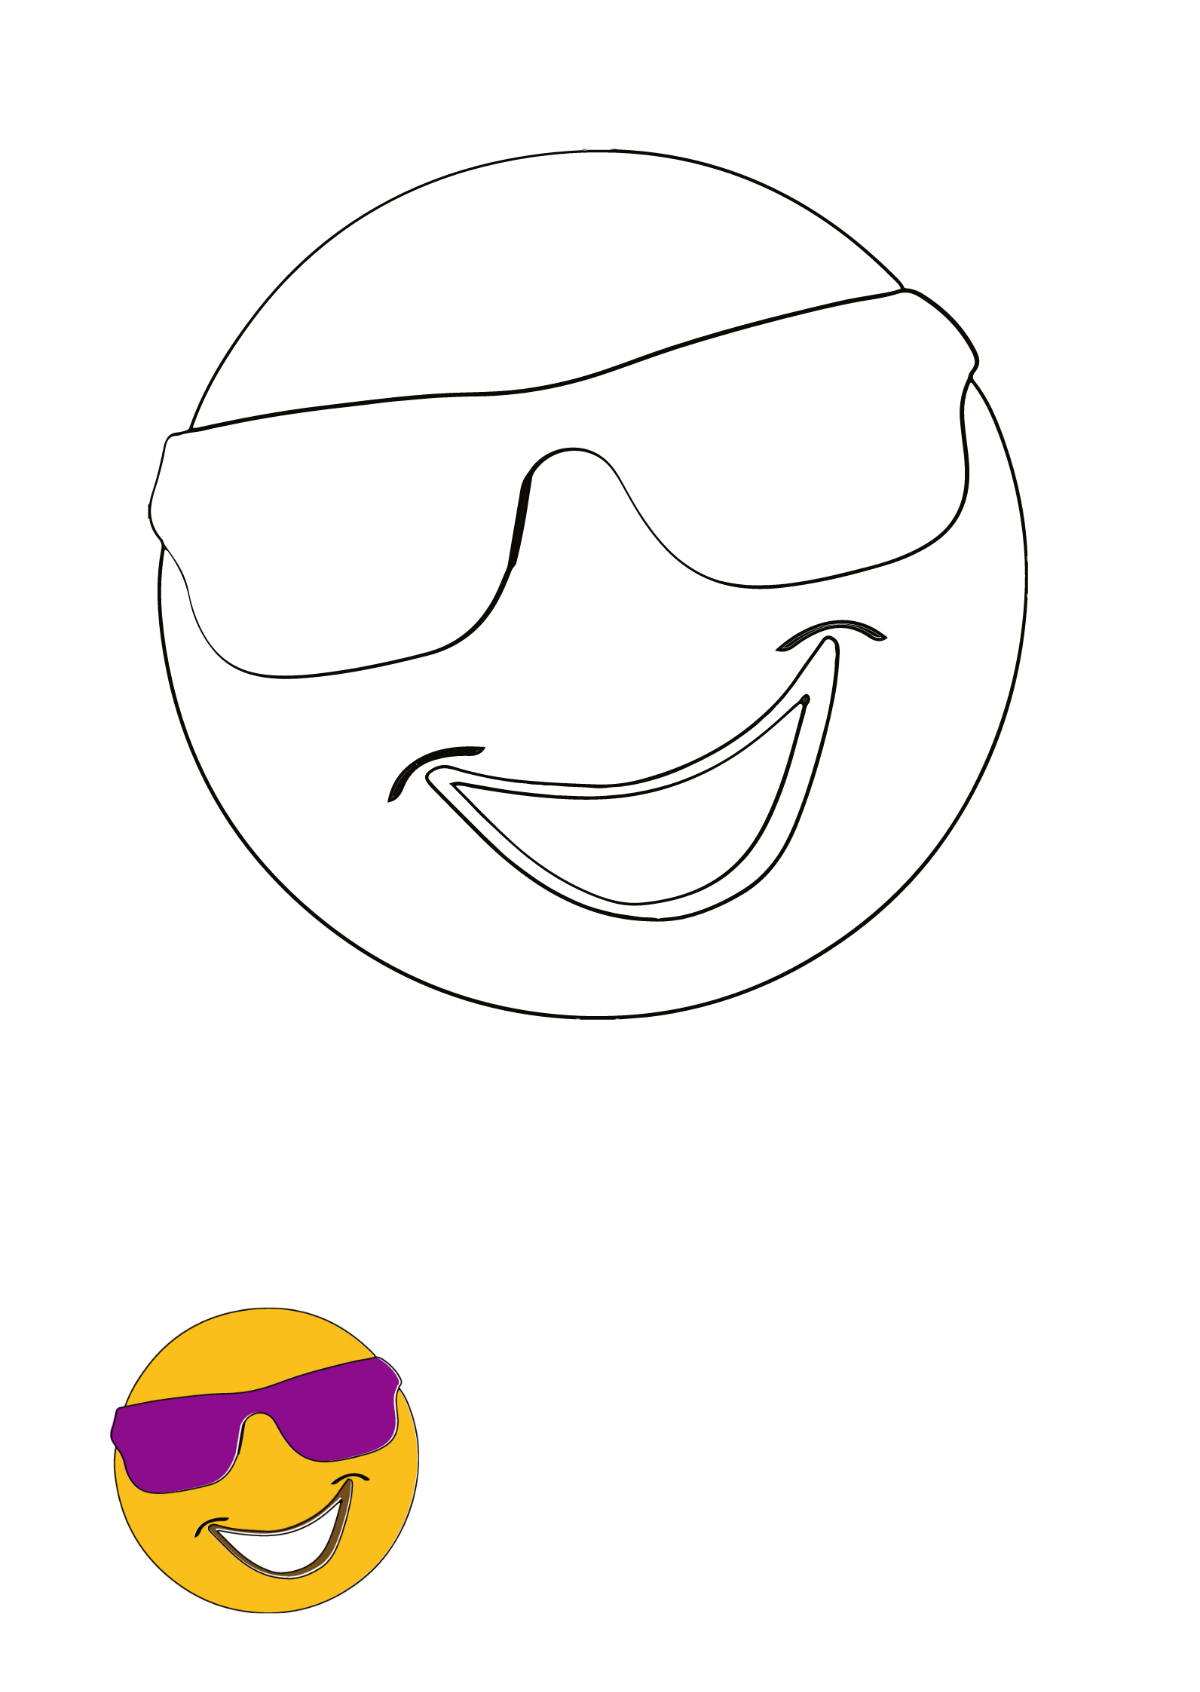 Smiley Face Sunglasses Coloring Page Template